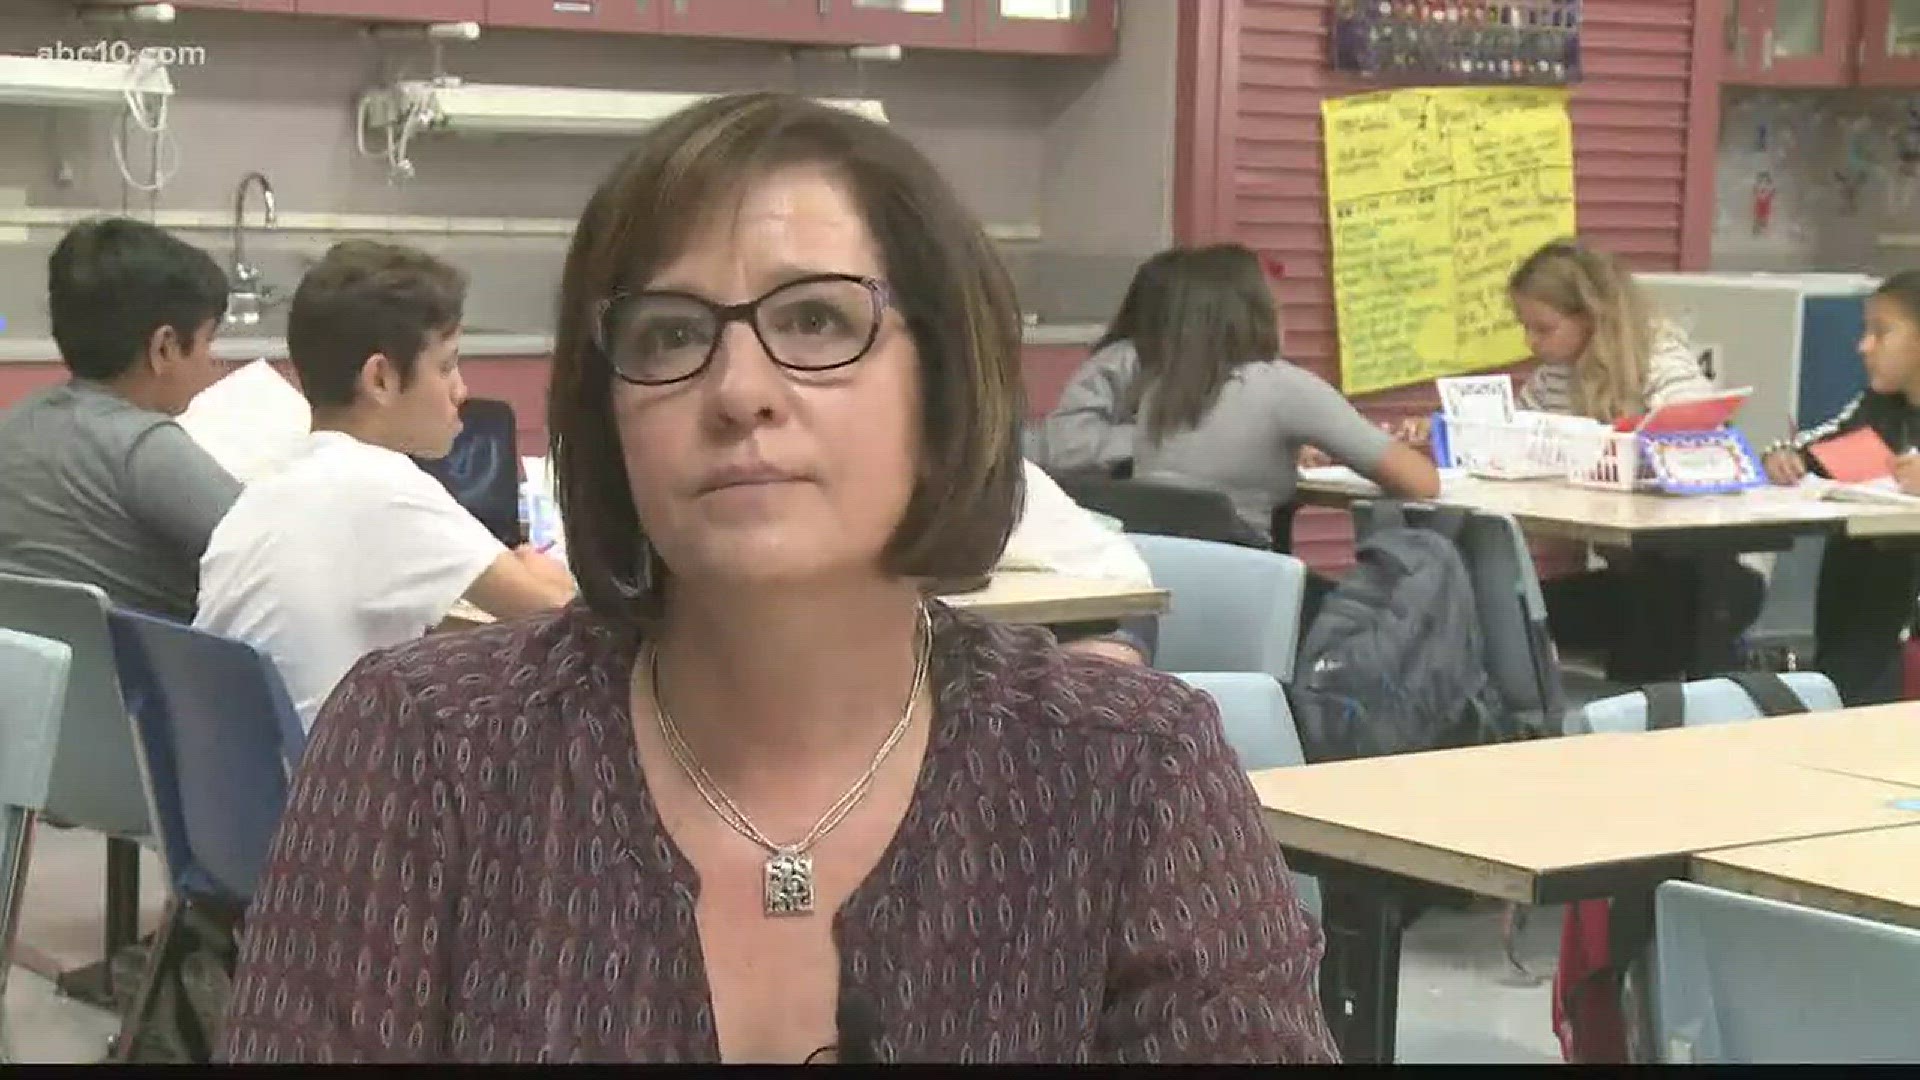 ABC10 is recognizing teacher Jessica Brown from Antelope Crossing Middle School.